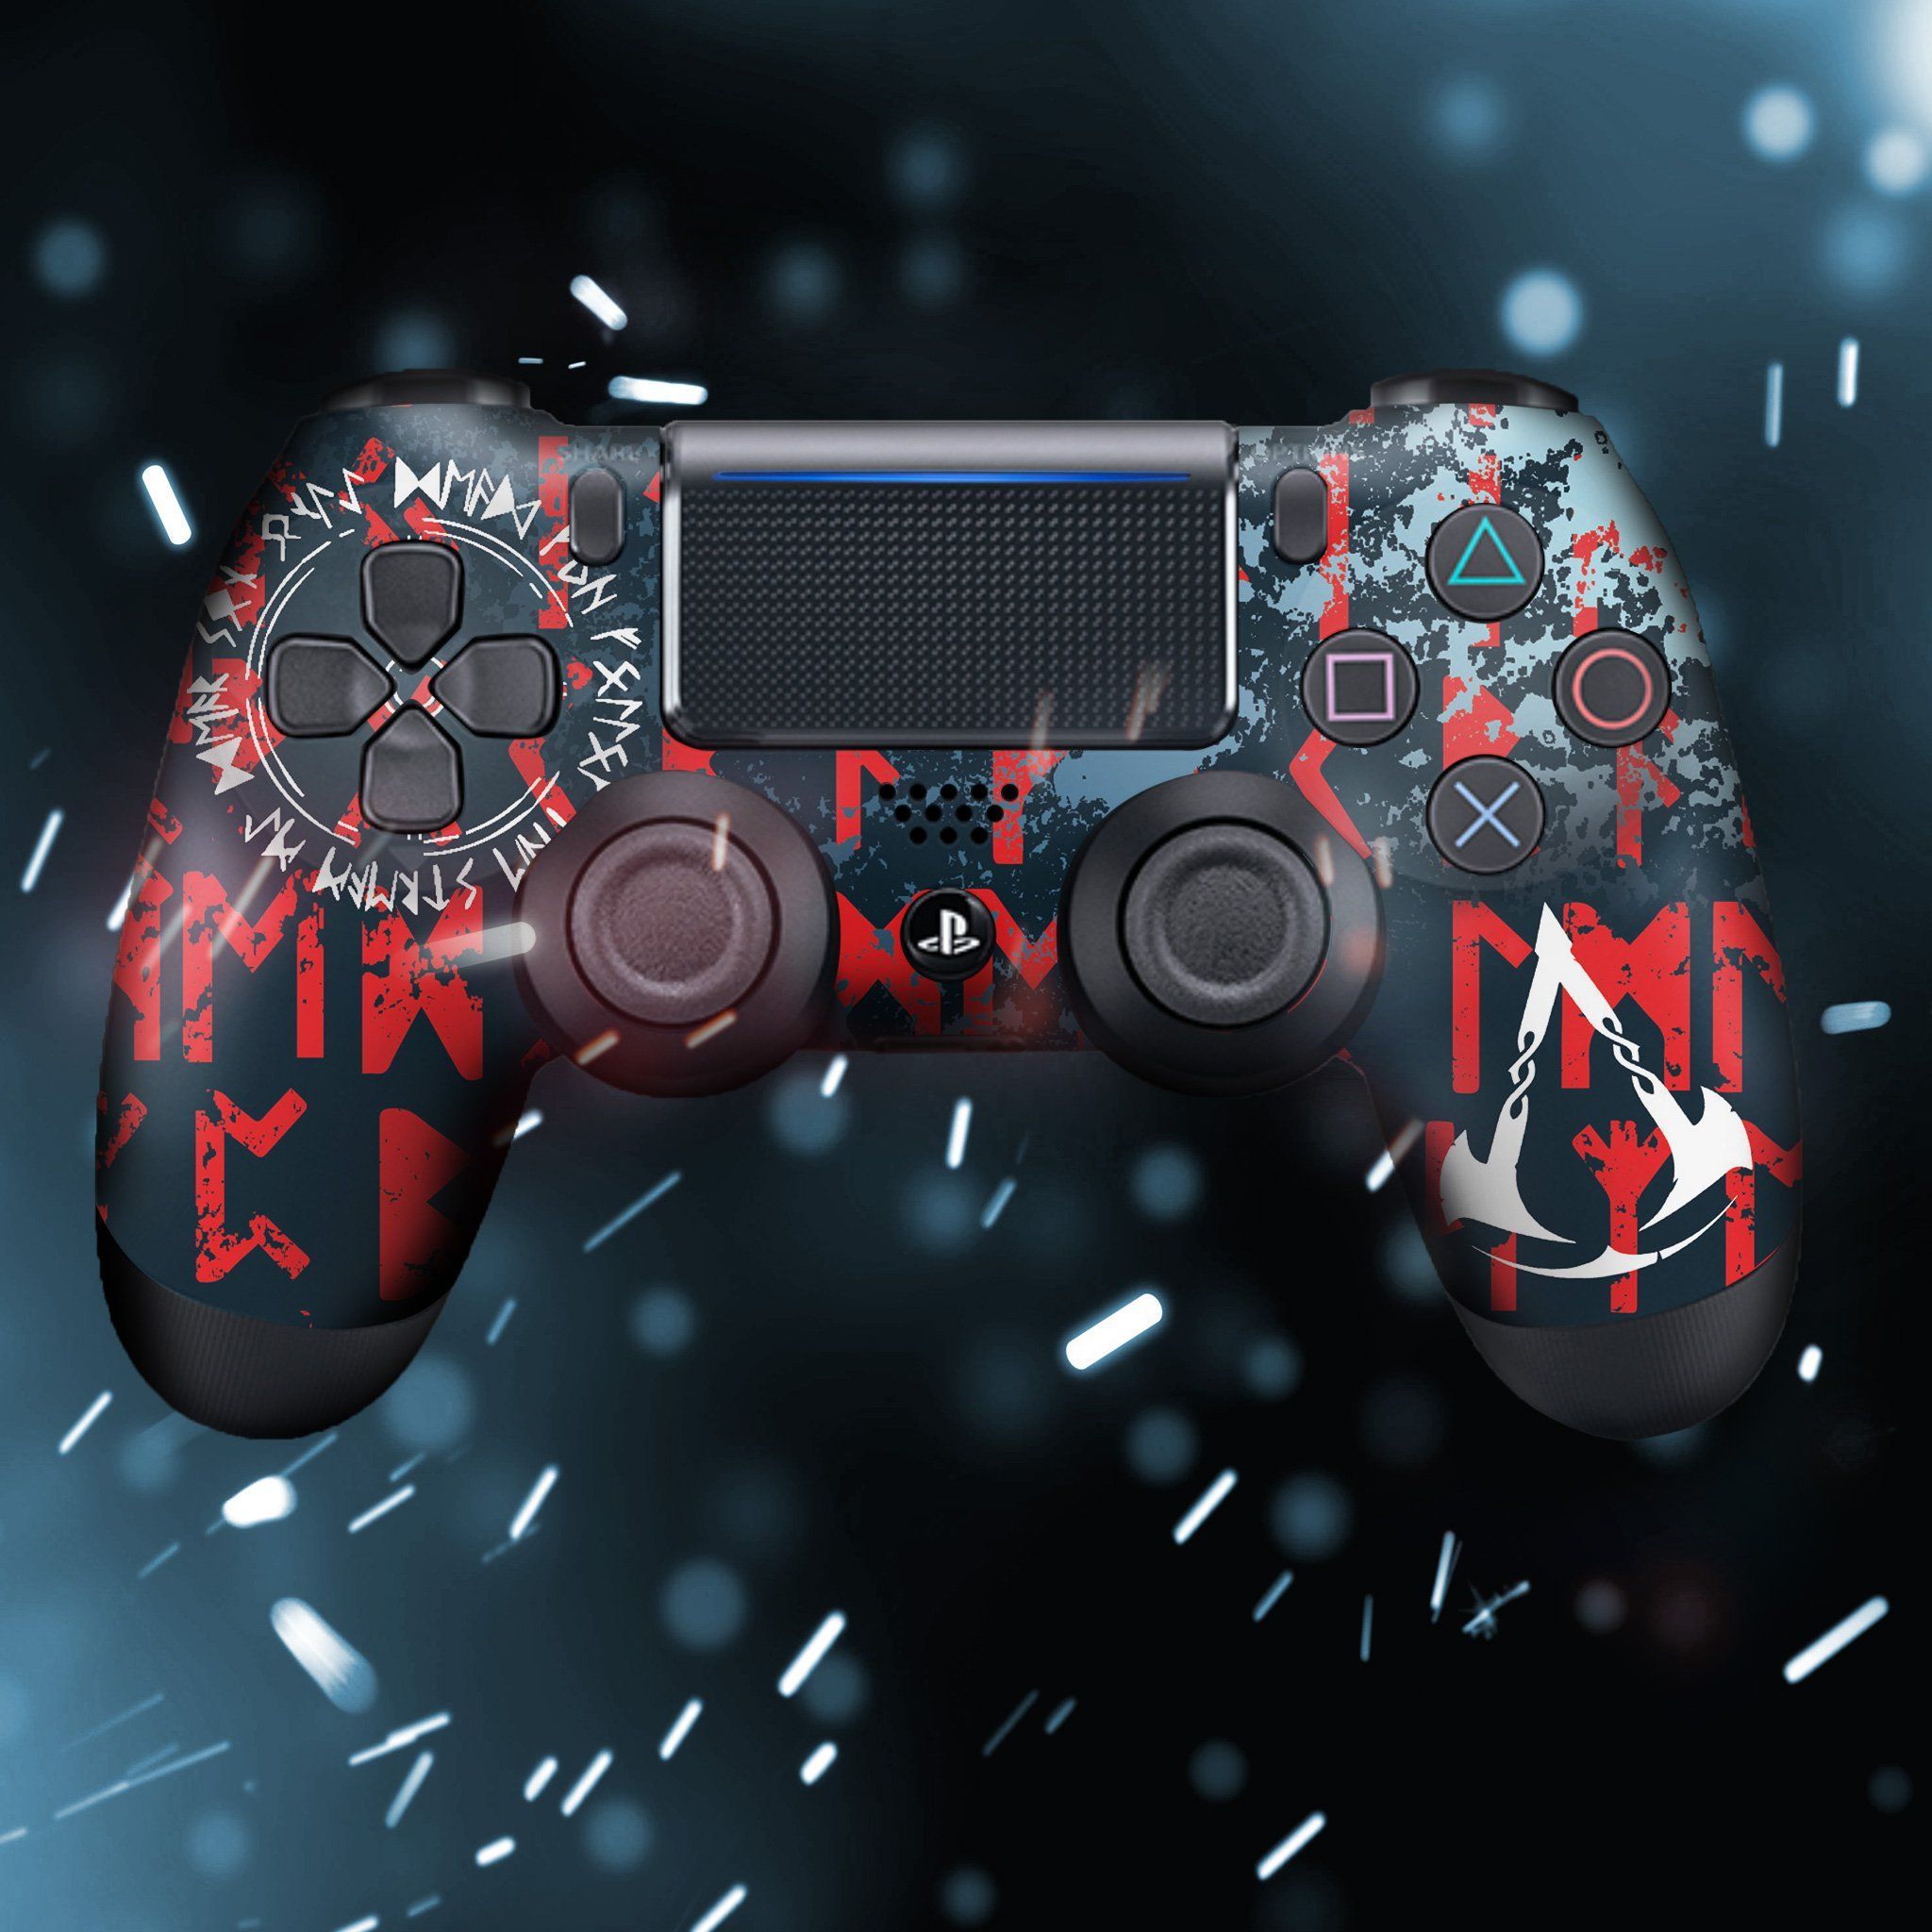 Assassin's Creed PS4 Controller 4K of Wallpaper for Andriod